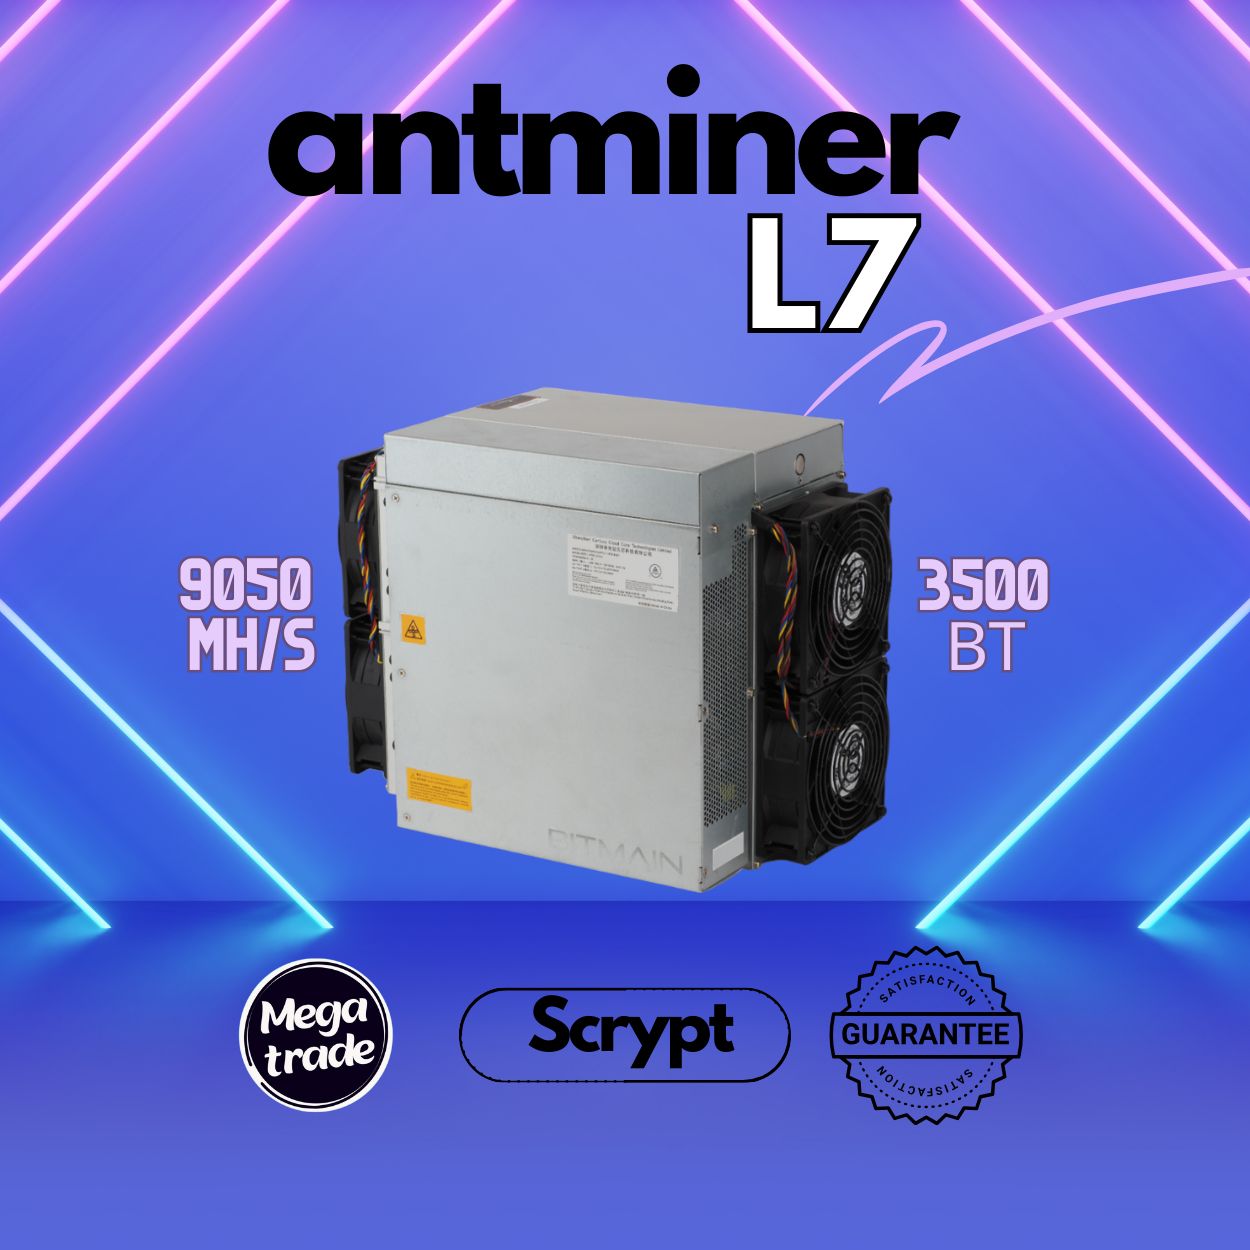 Bitmain Antminer l7 9500 MH/S. Antminer l7 9300. L7 9500mh. Аппарат l7 9500.